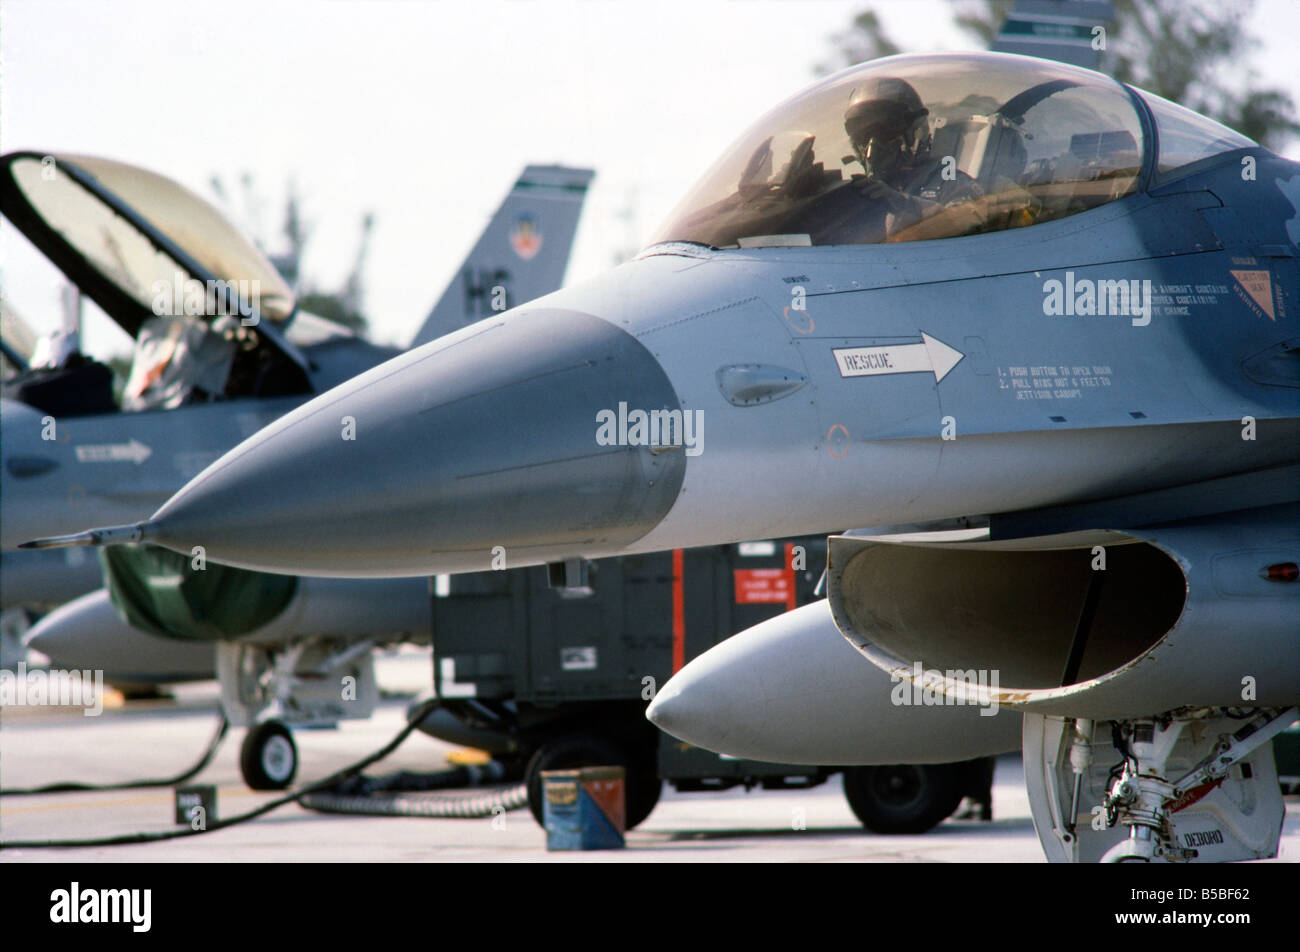 US Air Force F-16 fighter plane with Pilot in cockpit, on ground prepares for takeoff. Homestead Air Force Base, Florida Stock Photo